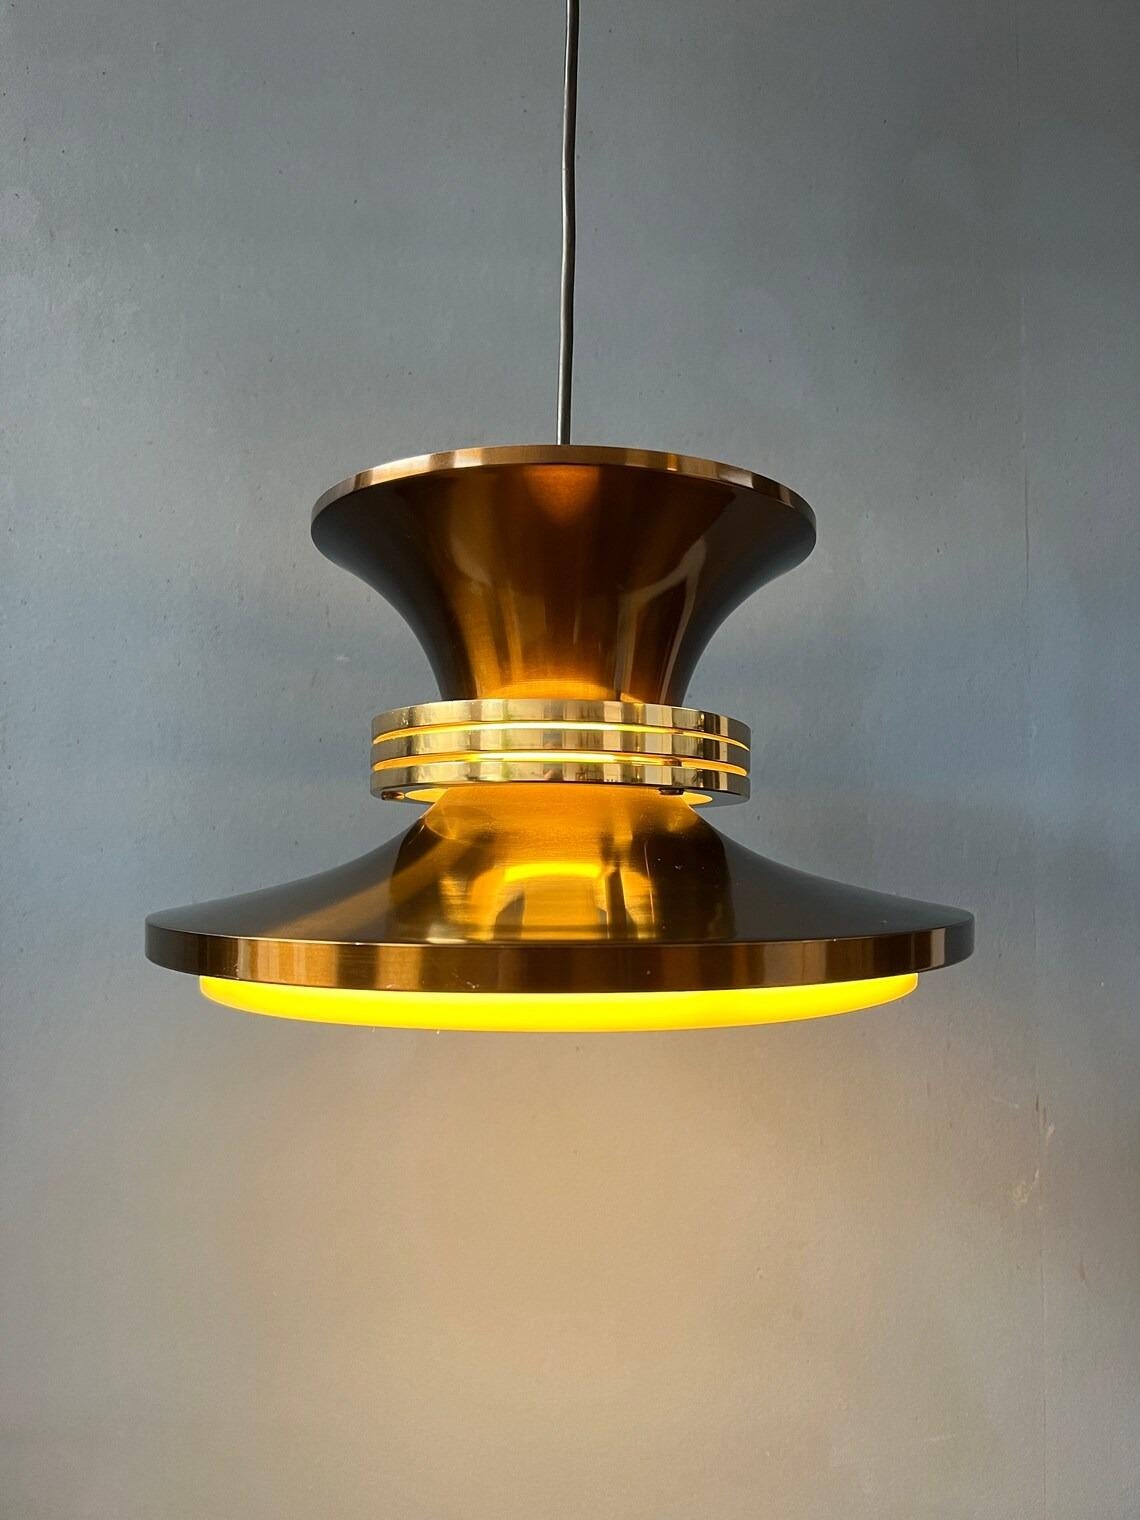 Vintage Danish pendant lamp in copper colour. The aluminium layered lamp creates a beautiful reflection of light. The lamp requires one E27/26 (standard) lightbulb.

Additional information:
Materials: Metal, plastic
Period: 1970s
Dimensions: ø